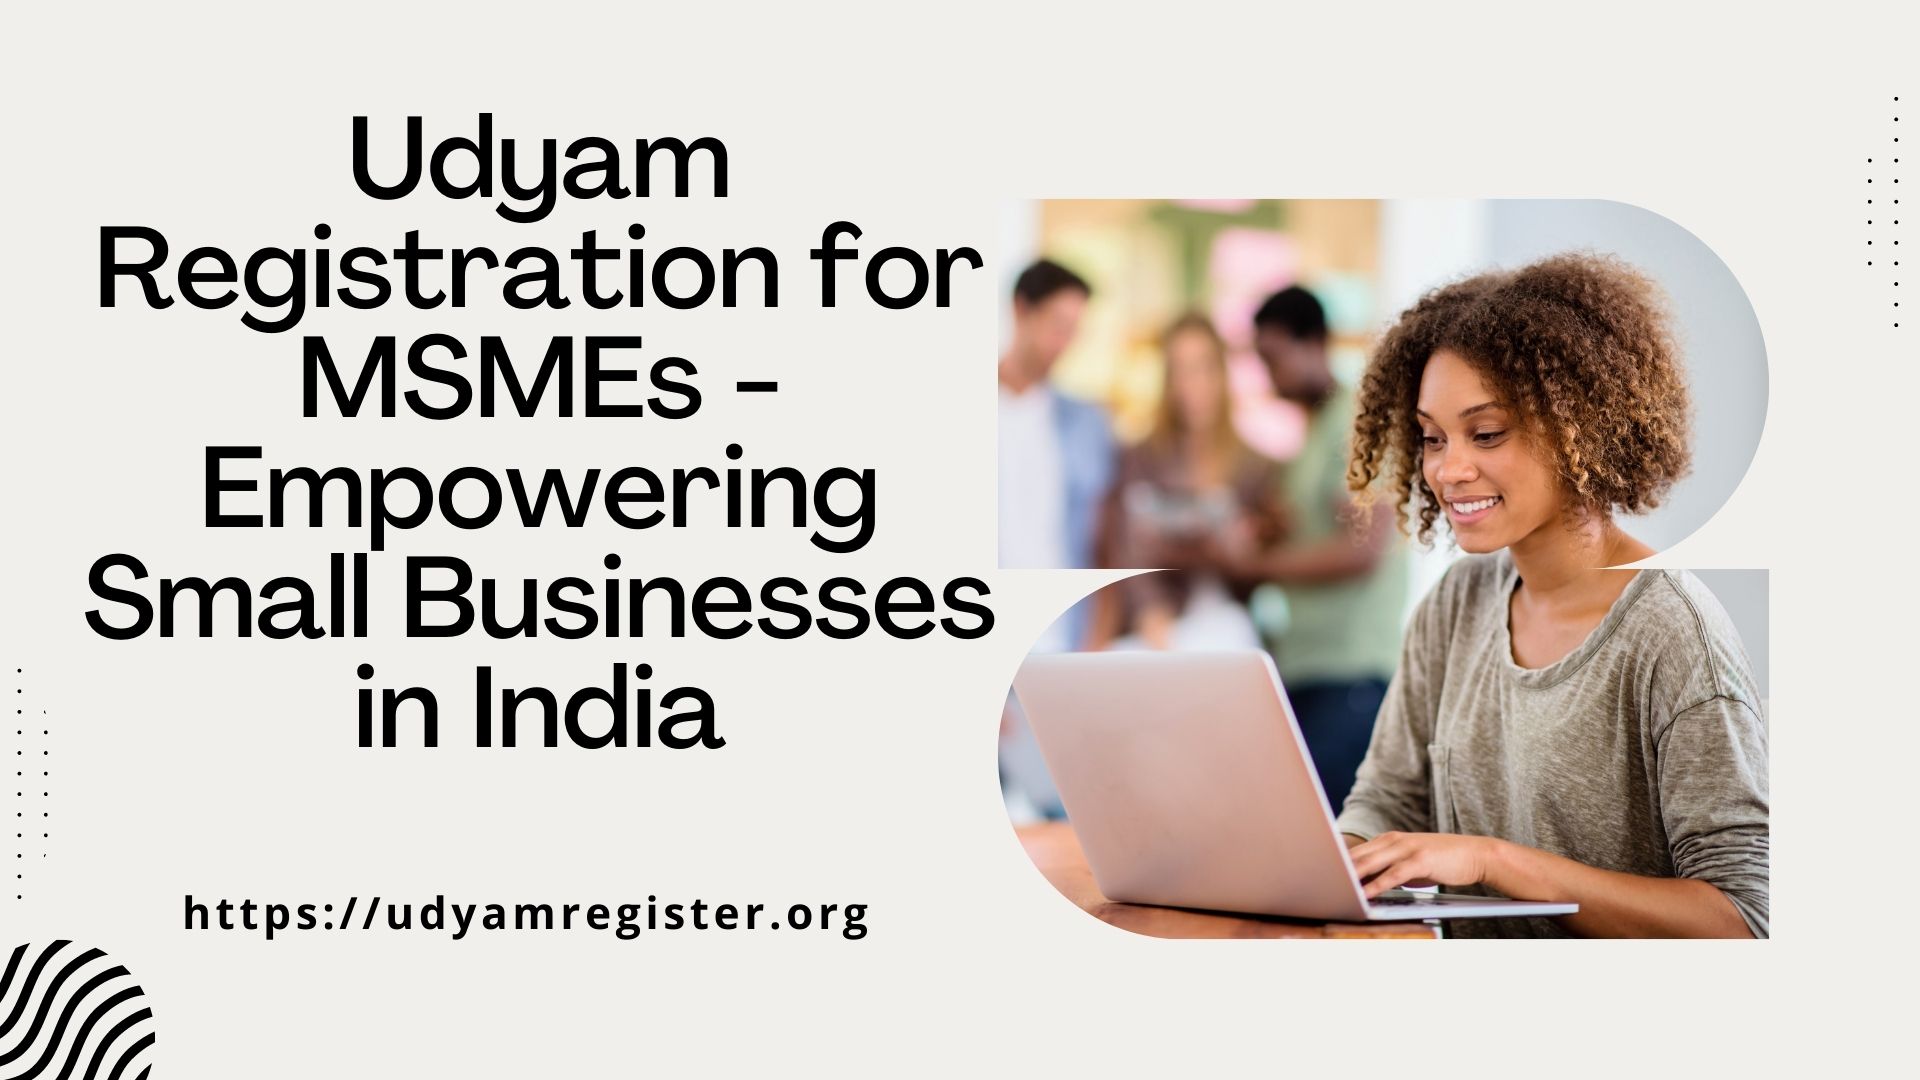 Udyam Registration for MSMEs – Empowering Small Businesses